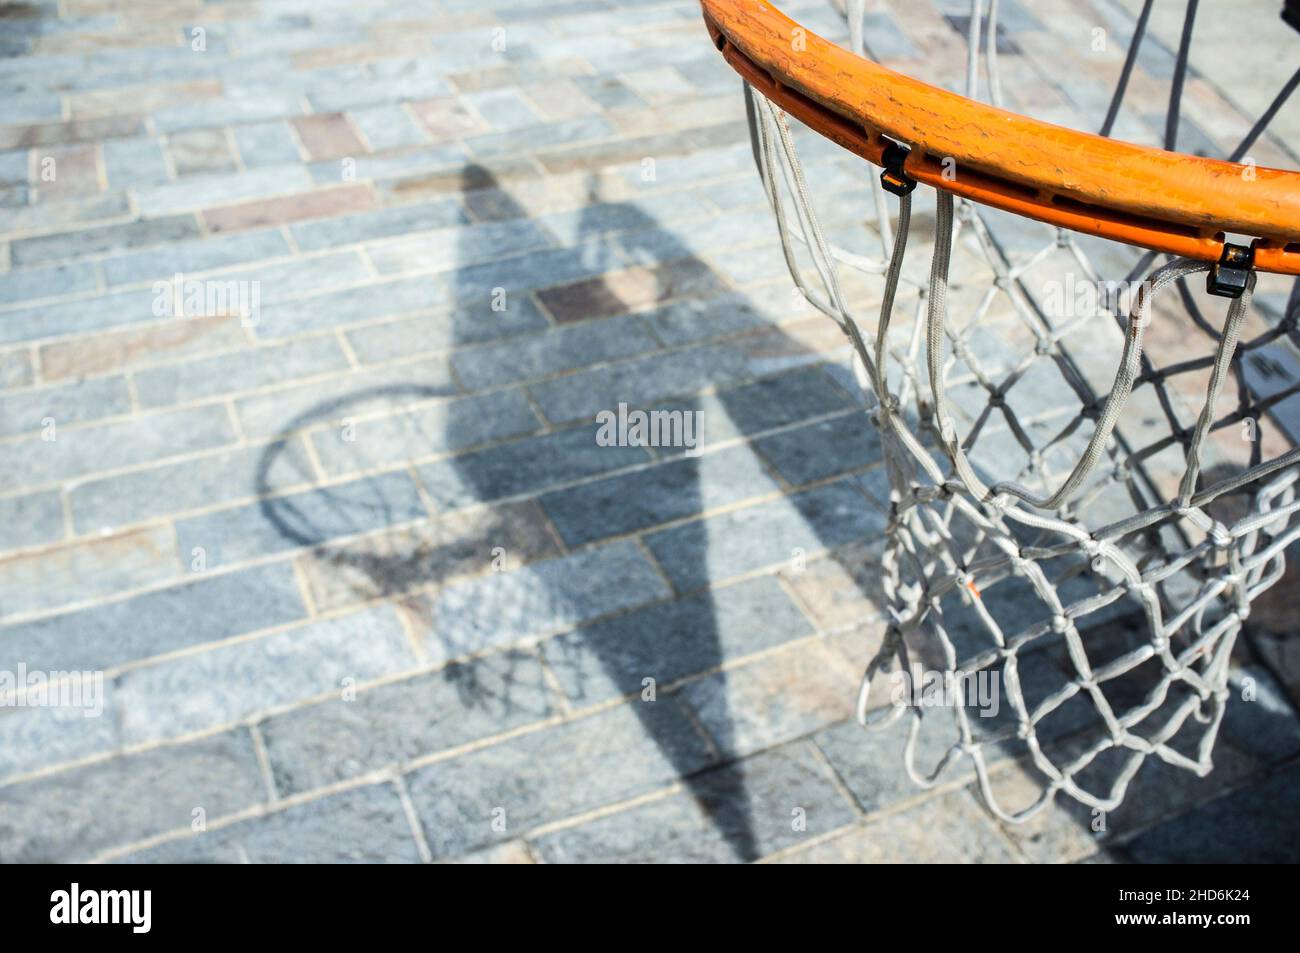 Basketball hoop proyecting shadow over cobble stone road surface. Closeup. Stock Photo